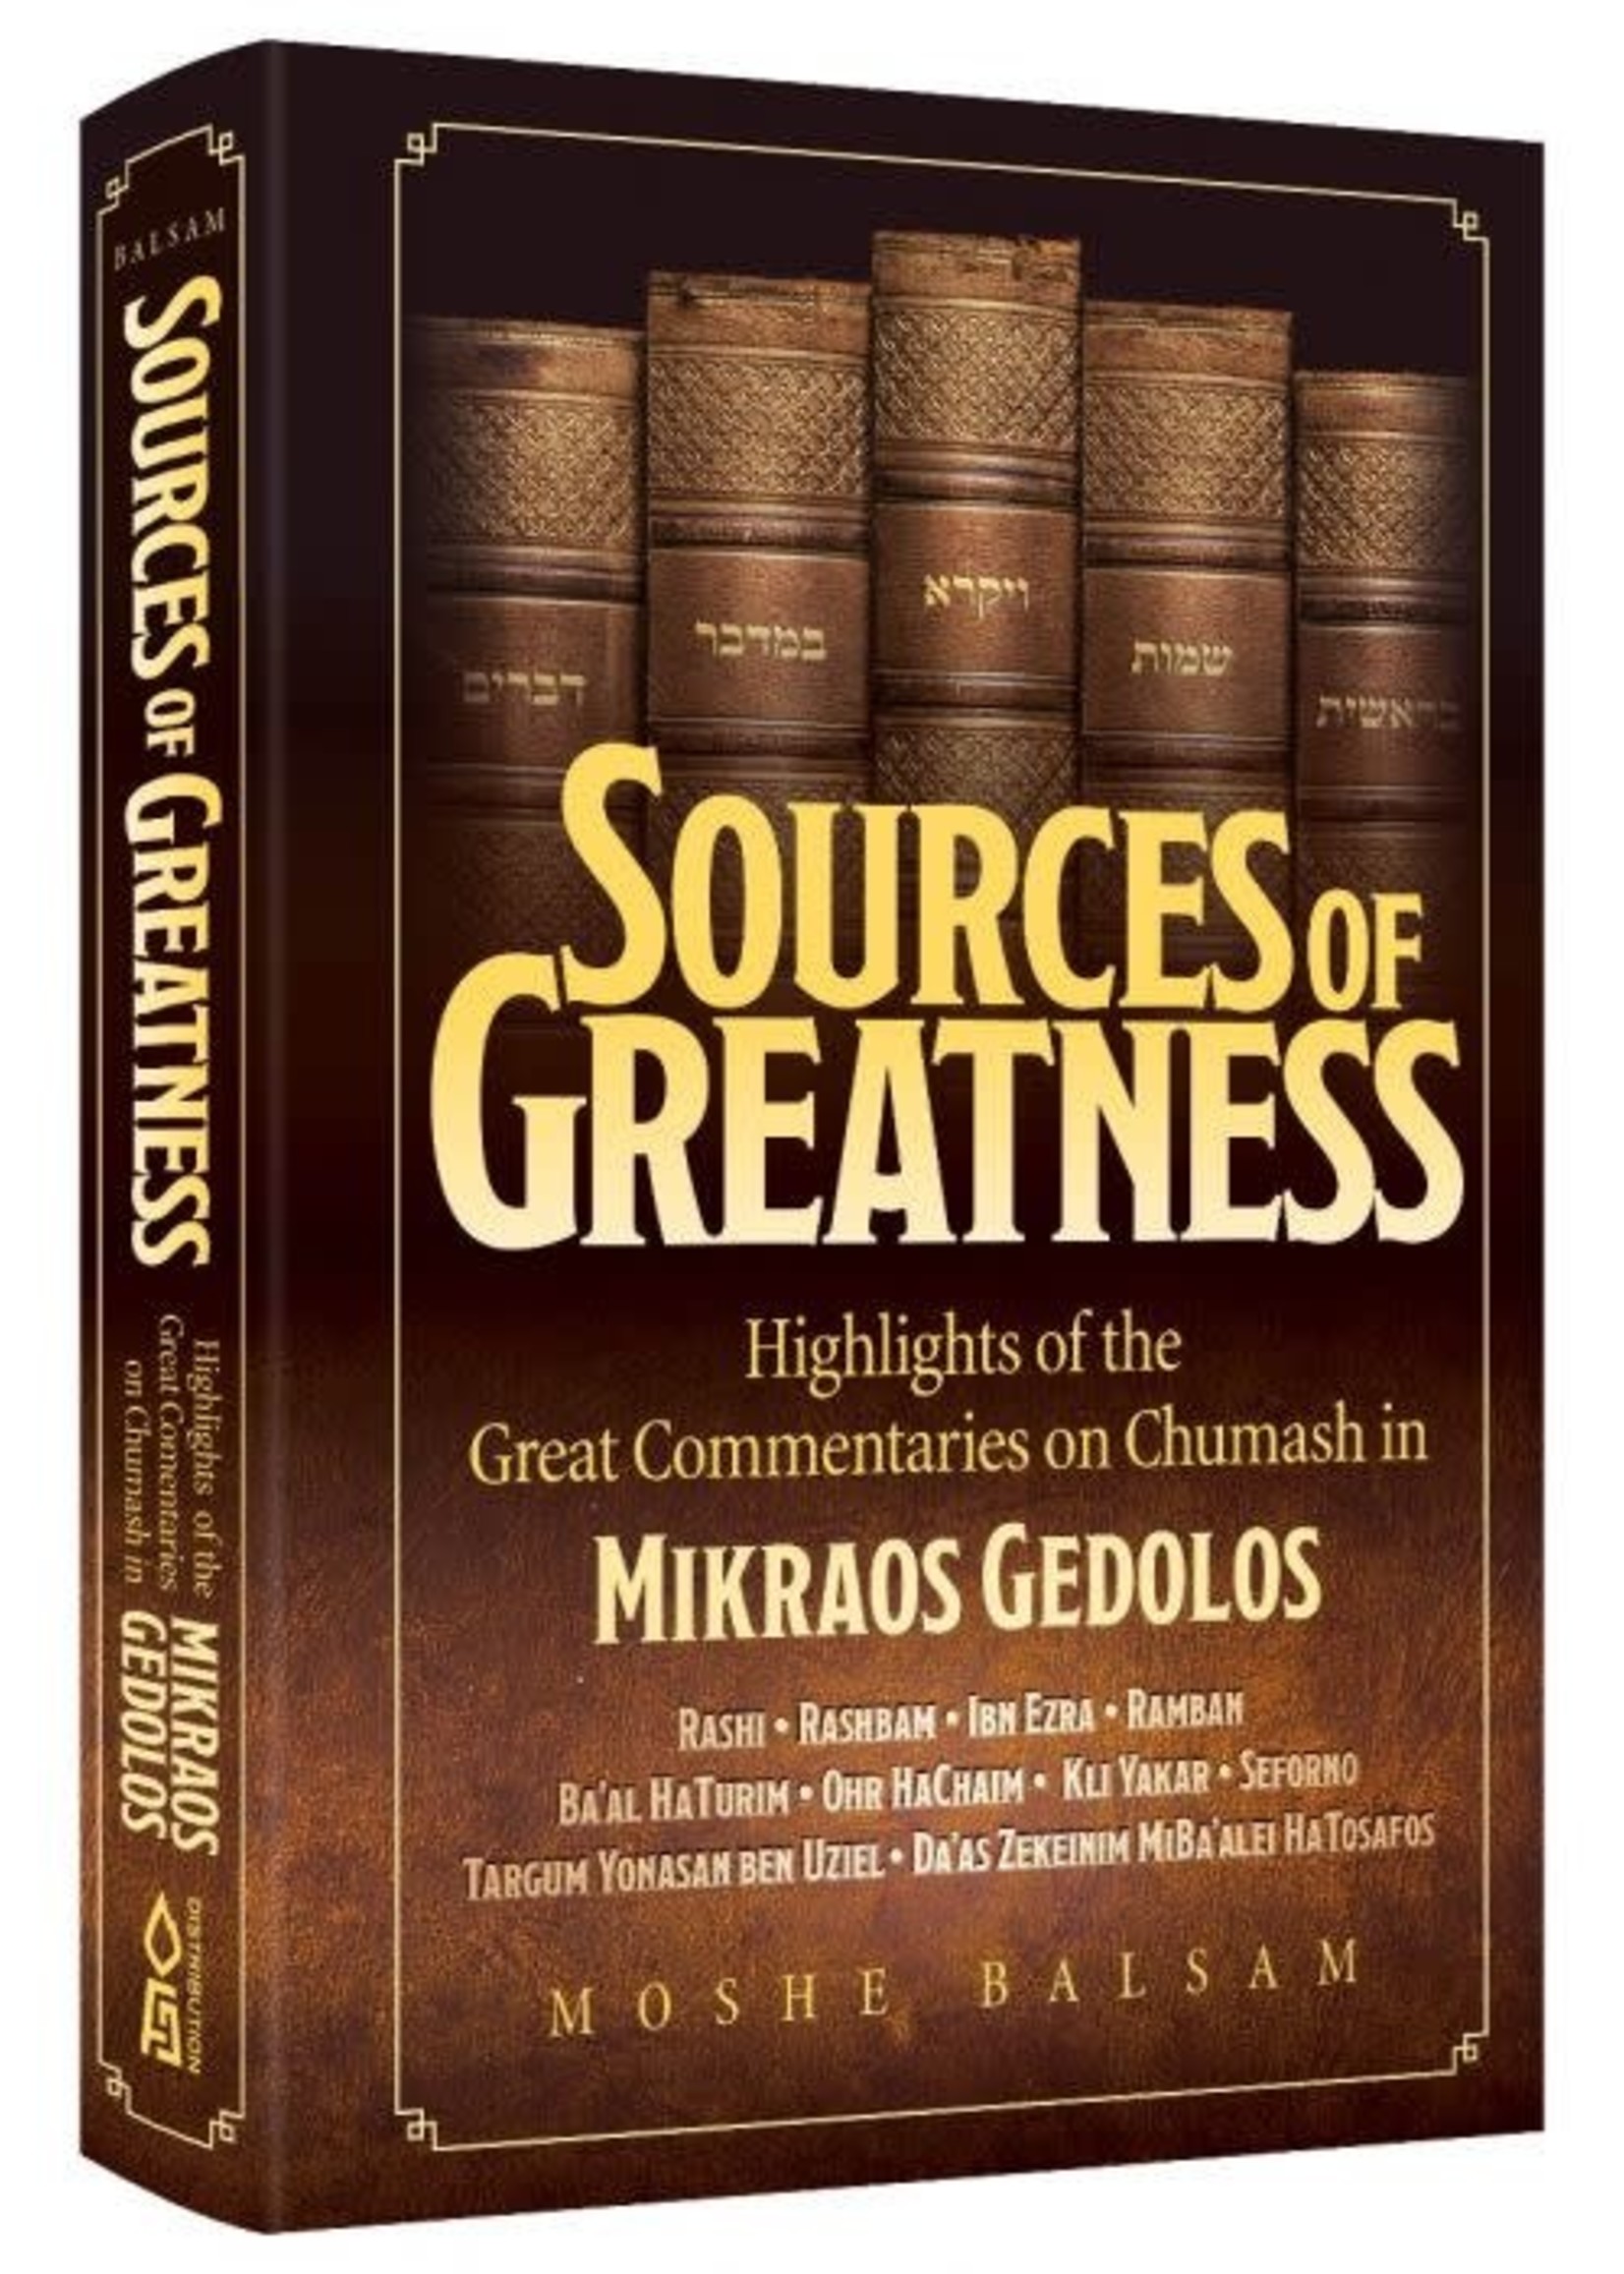 SOURCES OF GREATNESS